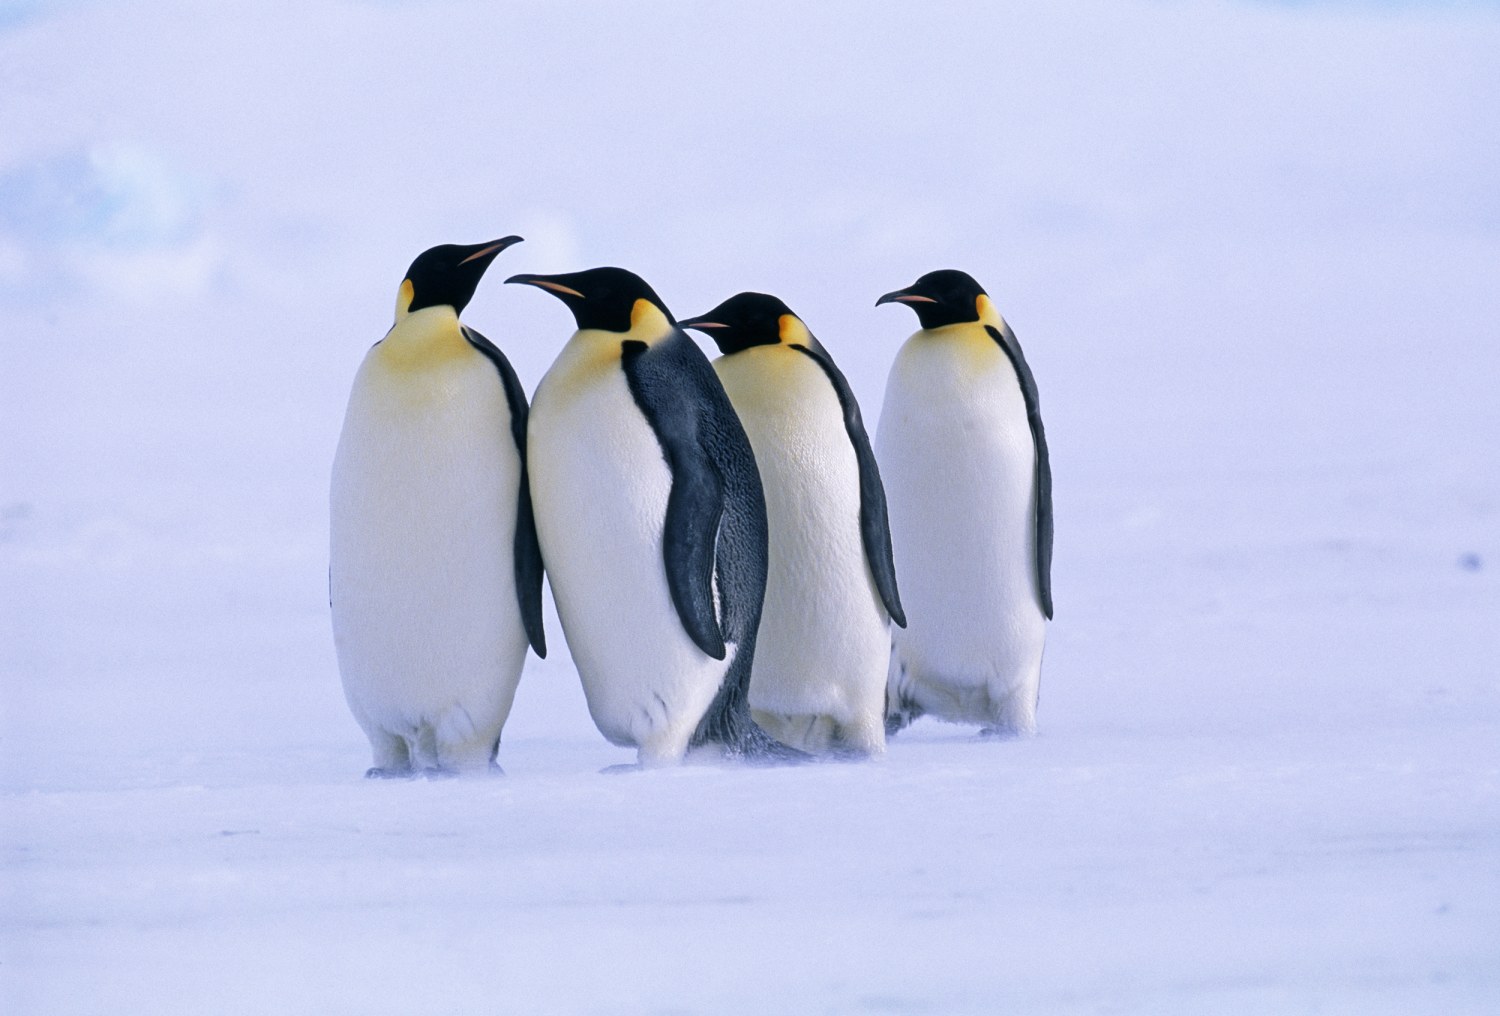 Emperor penguins are now a threatened species due to climate